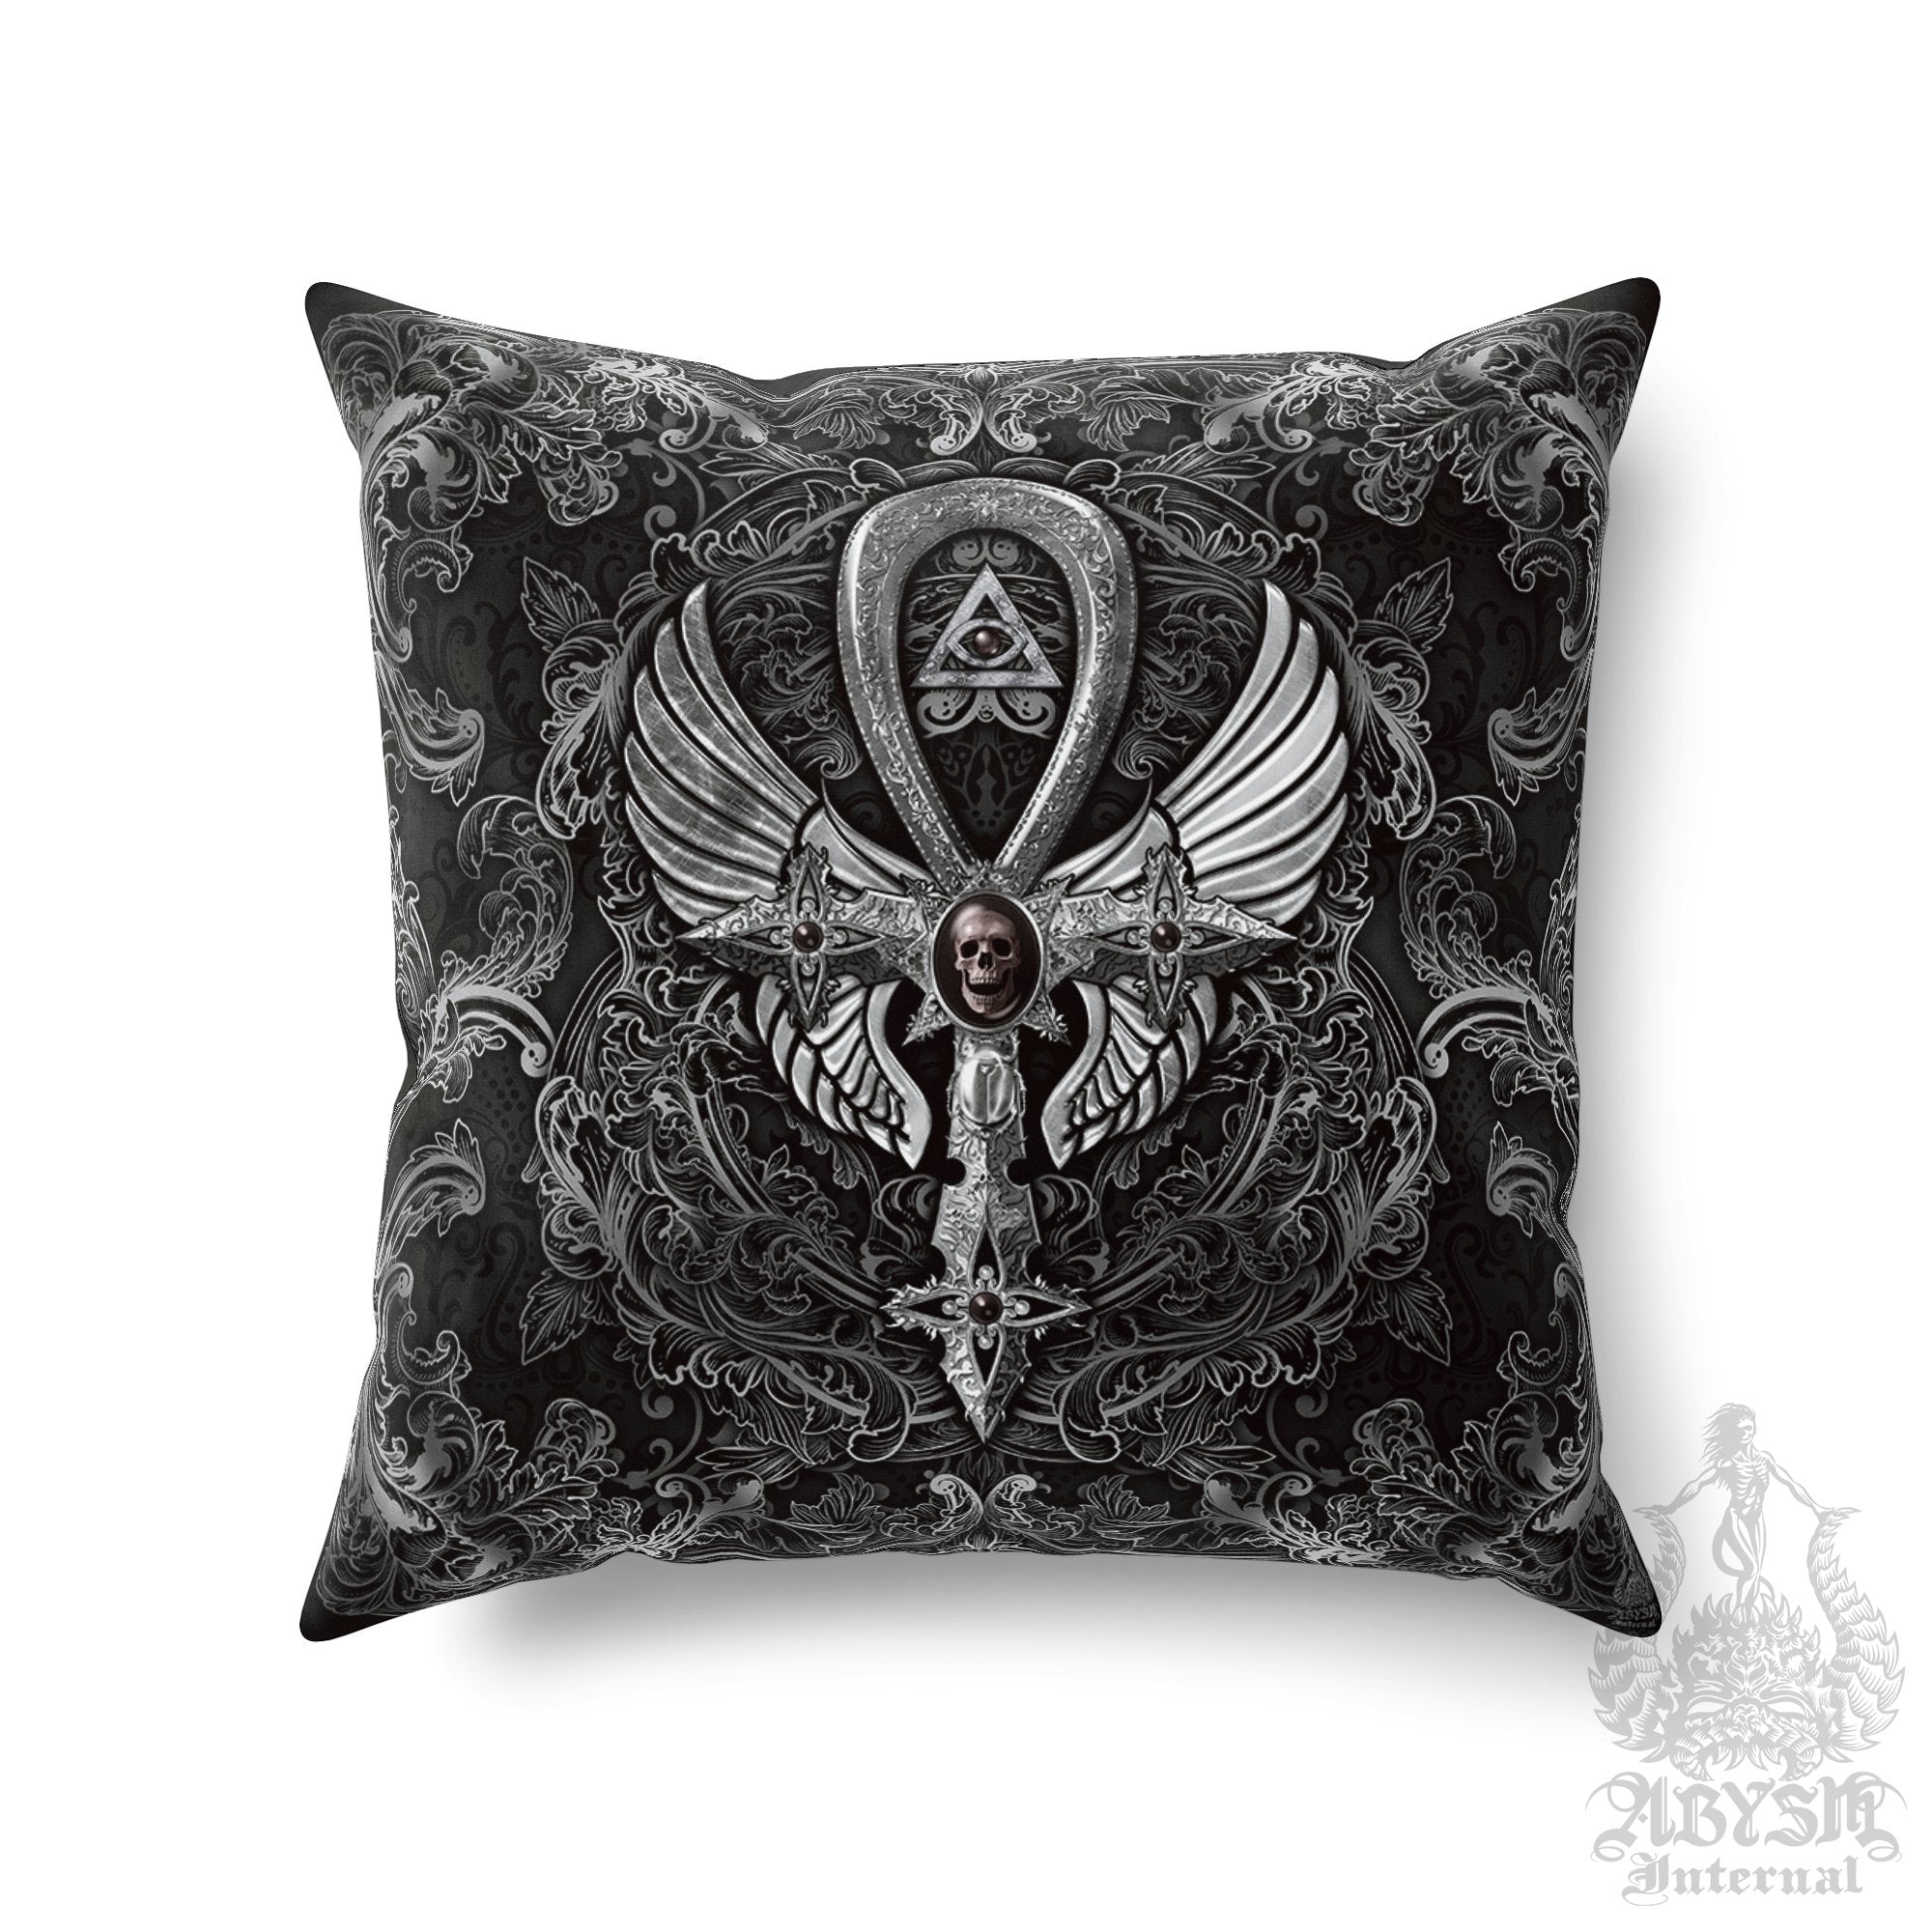 Goth Throw Pillow, Decorative Accent Pillow, Square Cushion Cover, Gothic Room Decor, Dark Art, Alternative Home - Ankh Cross, Black, Gold, Red, 3 Colors - Abysm Internal